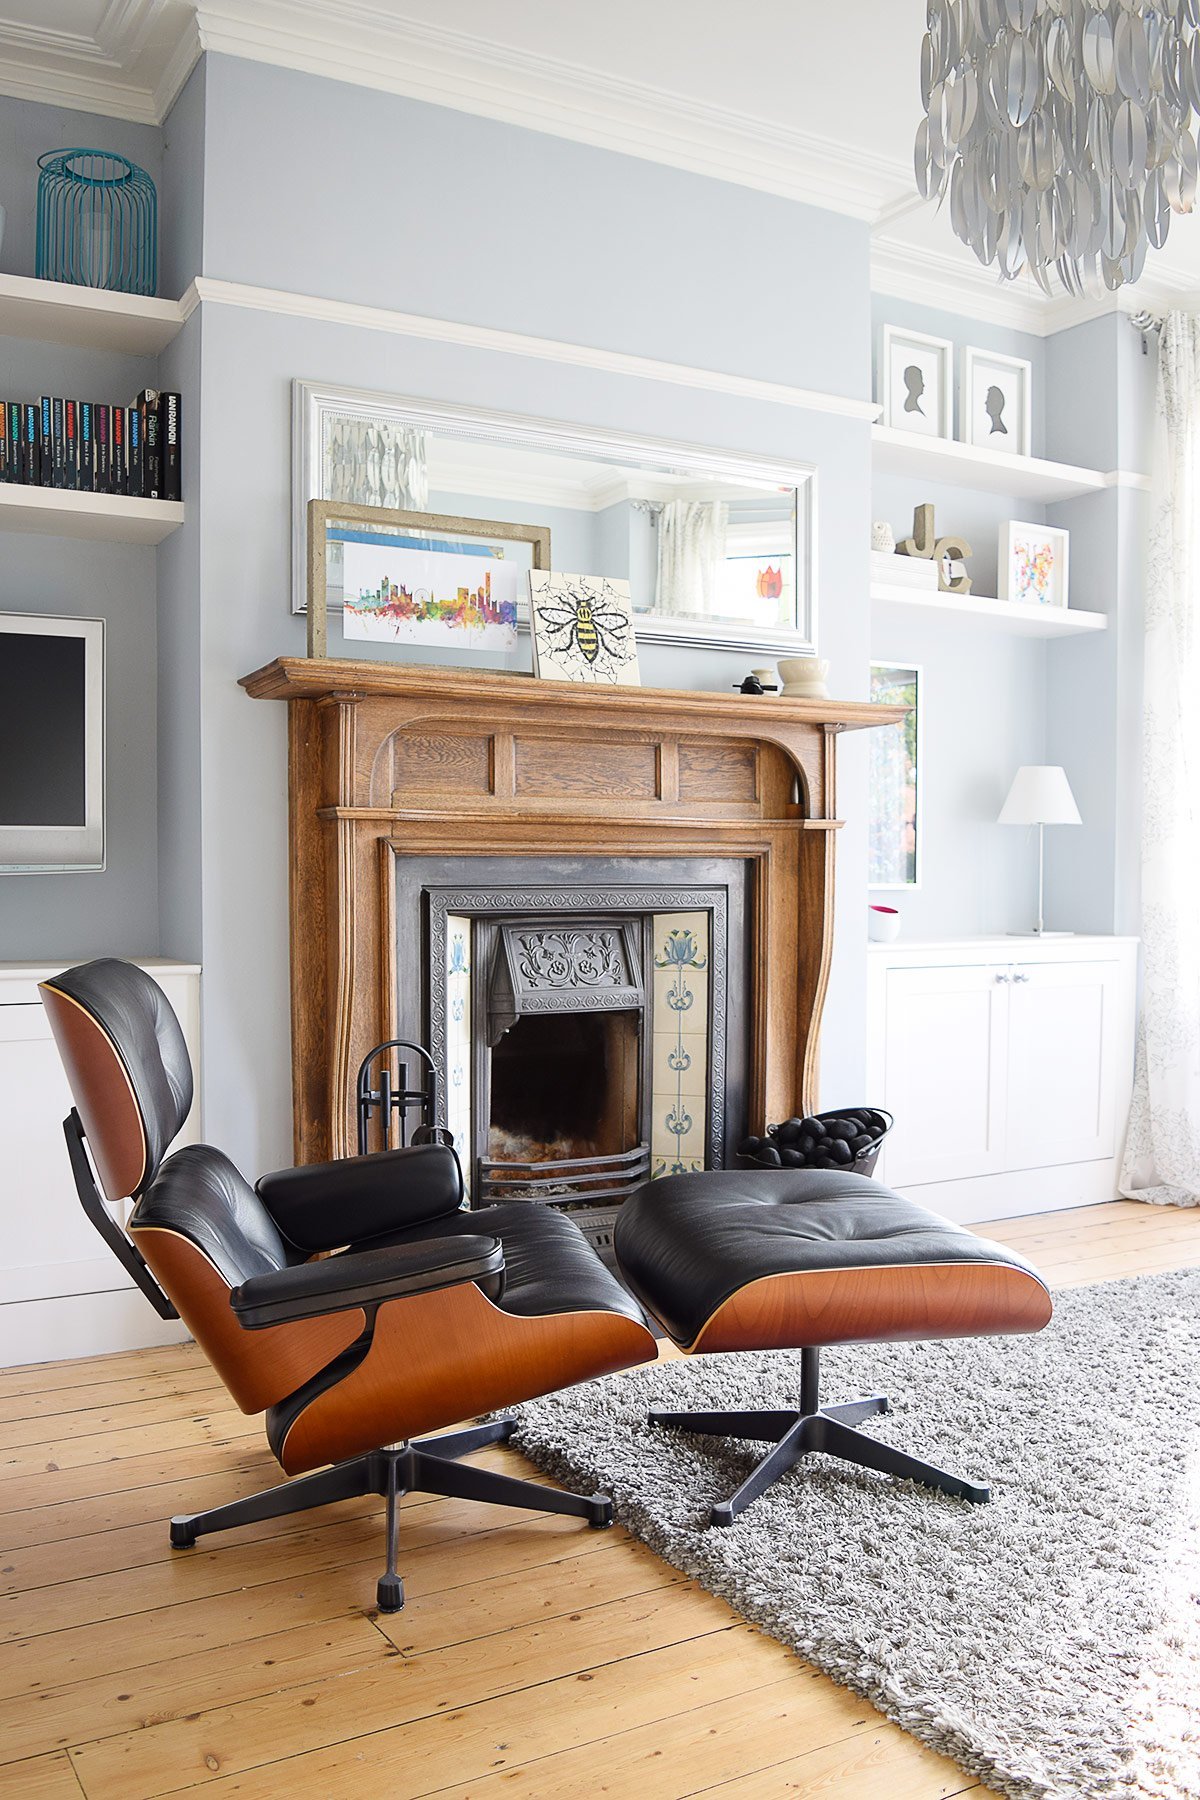 Edwardian Living Room With Fireplace and Eames Lounge Chair | Little House On The Corner